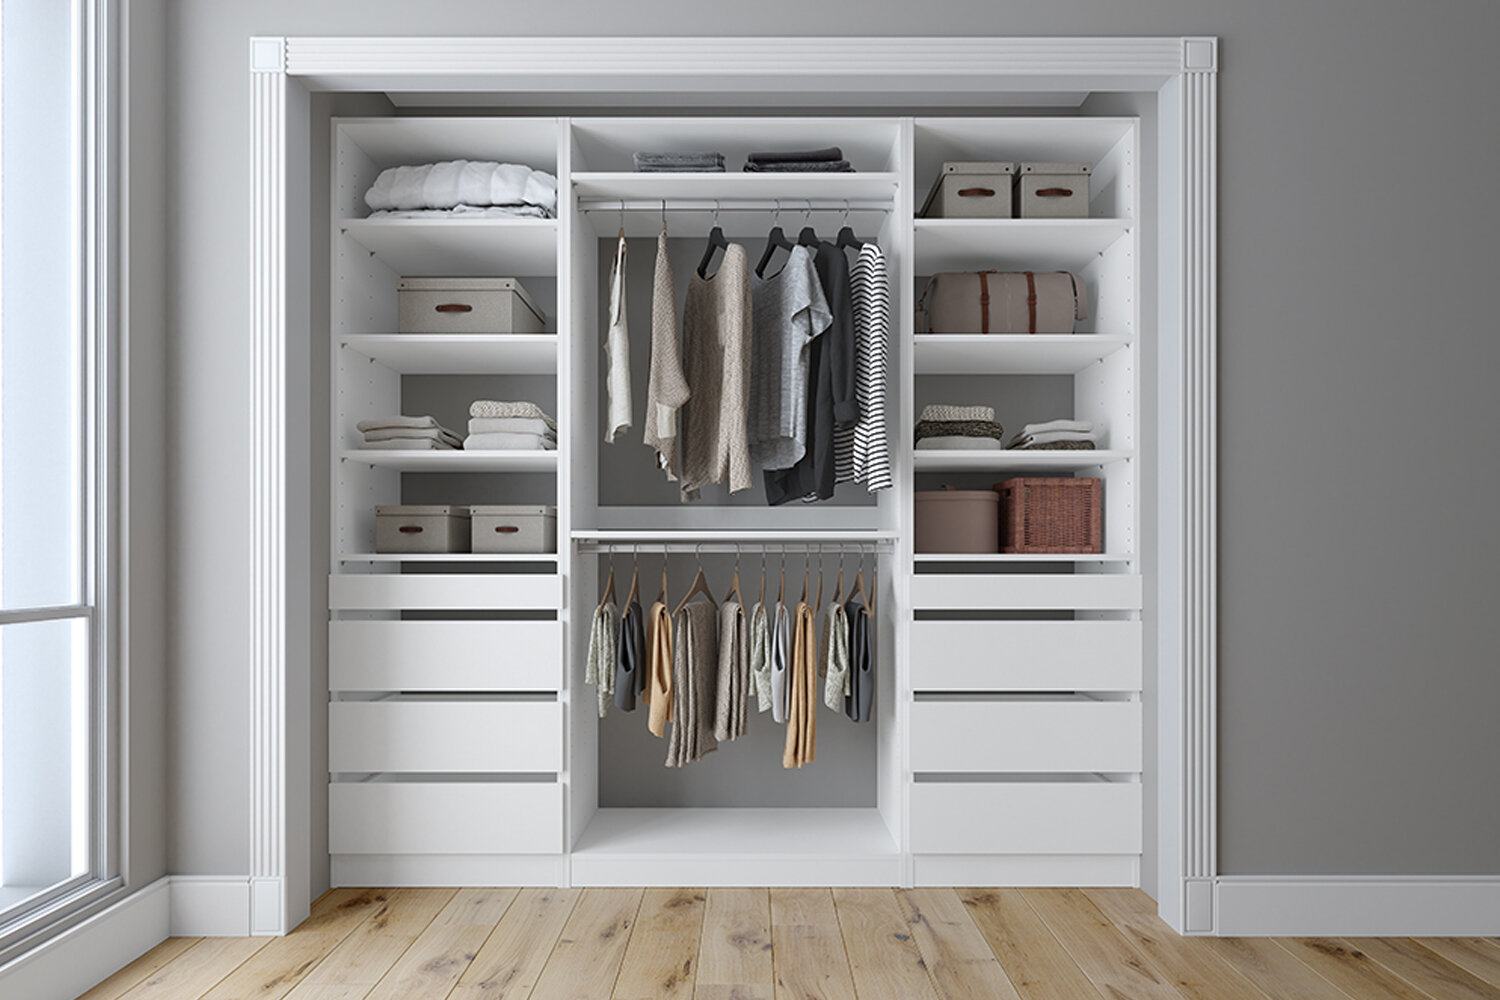 It gives you the opportunity to create your own Closet space and maximize y...